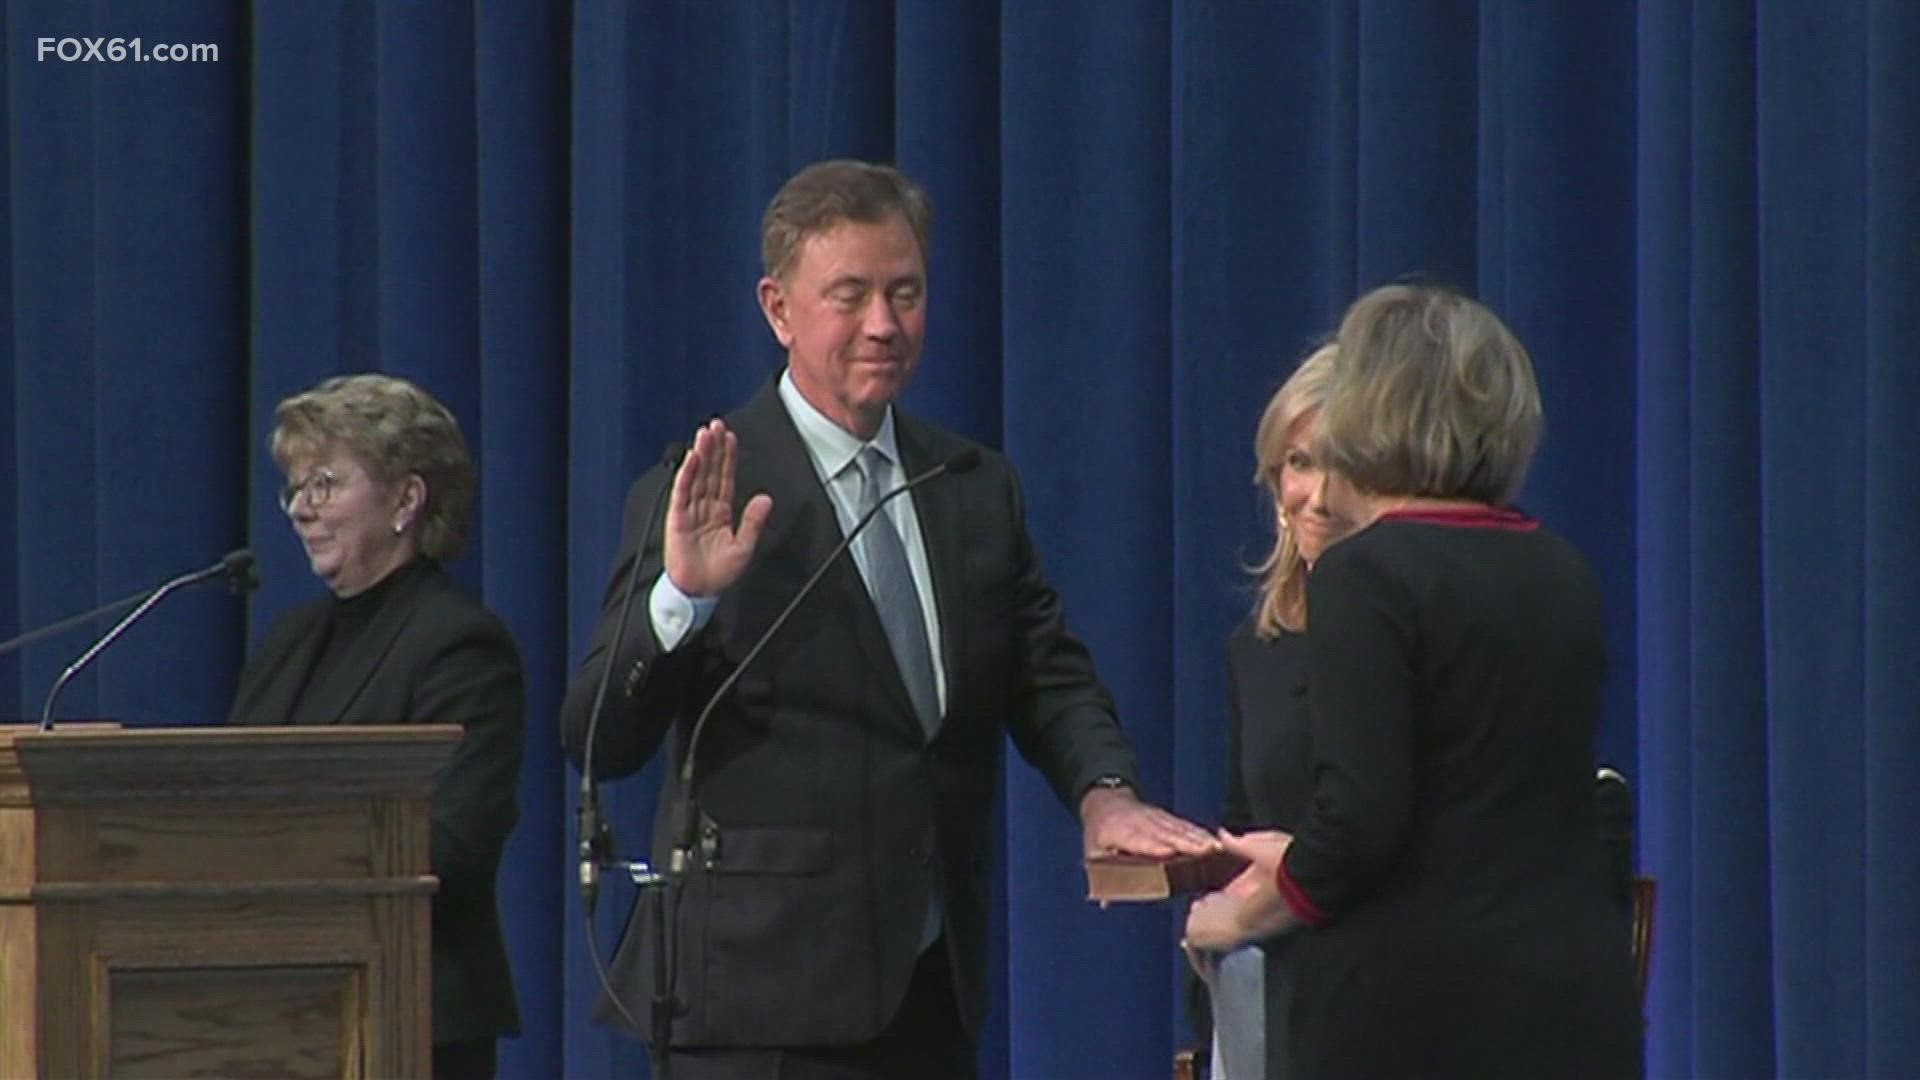 Gov. Ned Lamont won his election in November by a greater majority than his first election for governor.